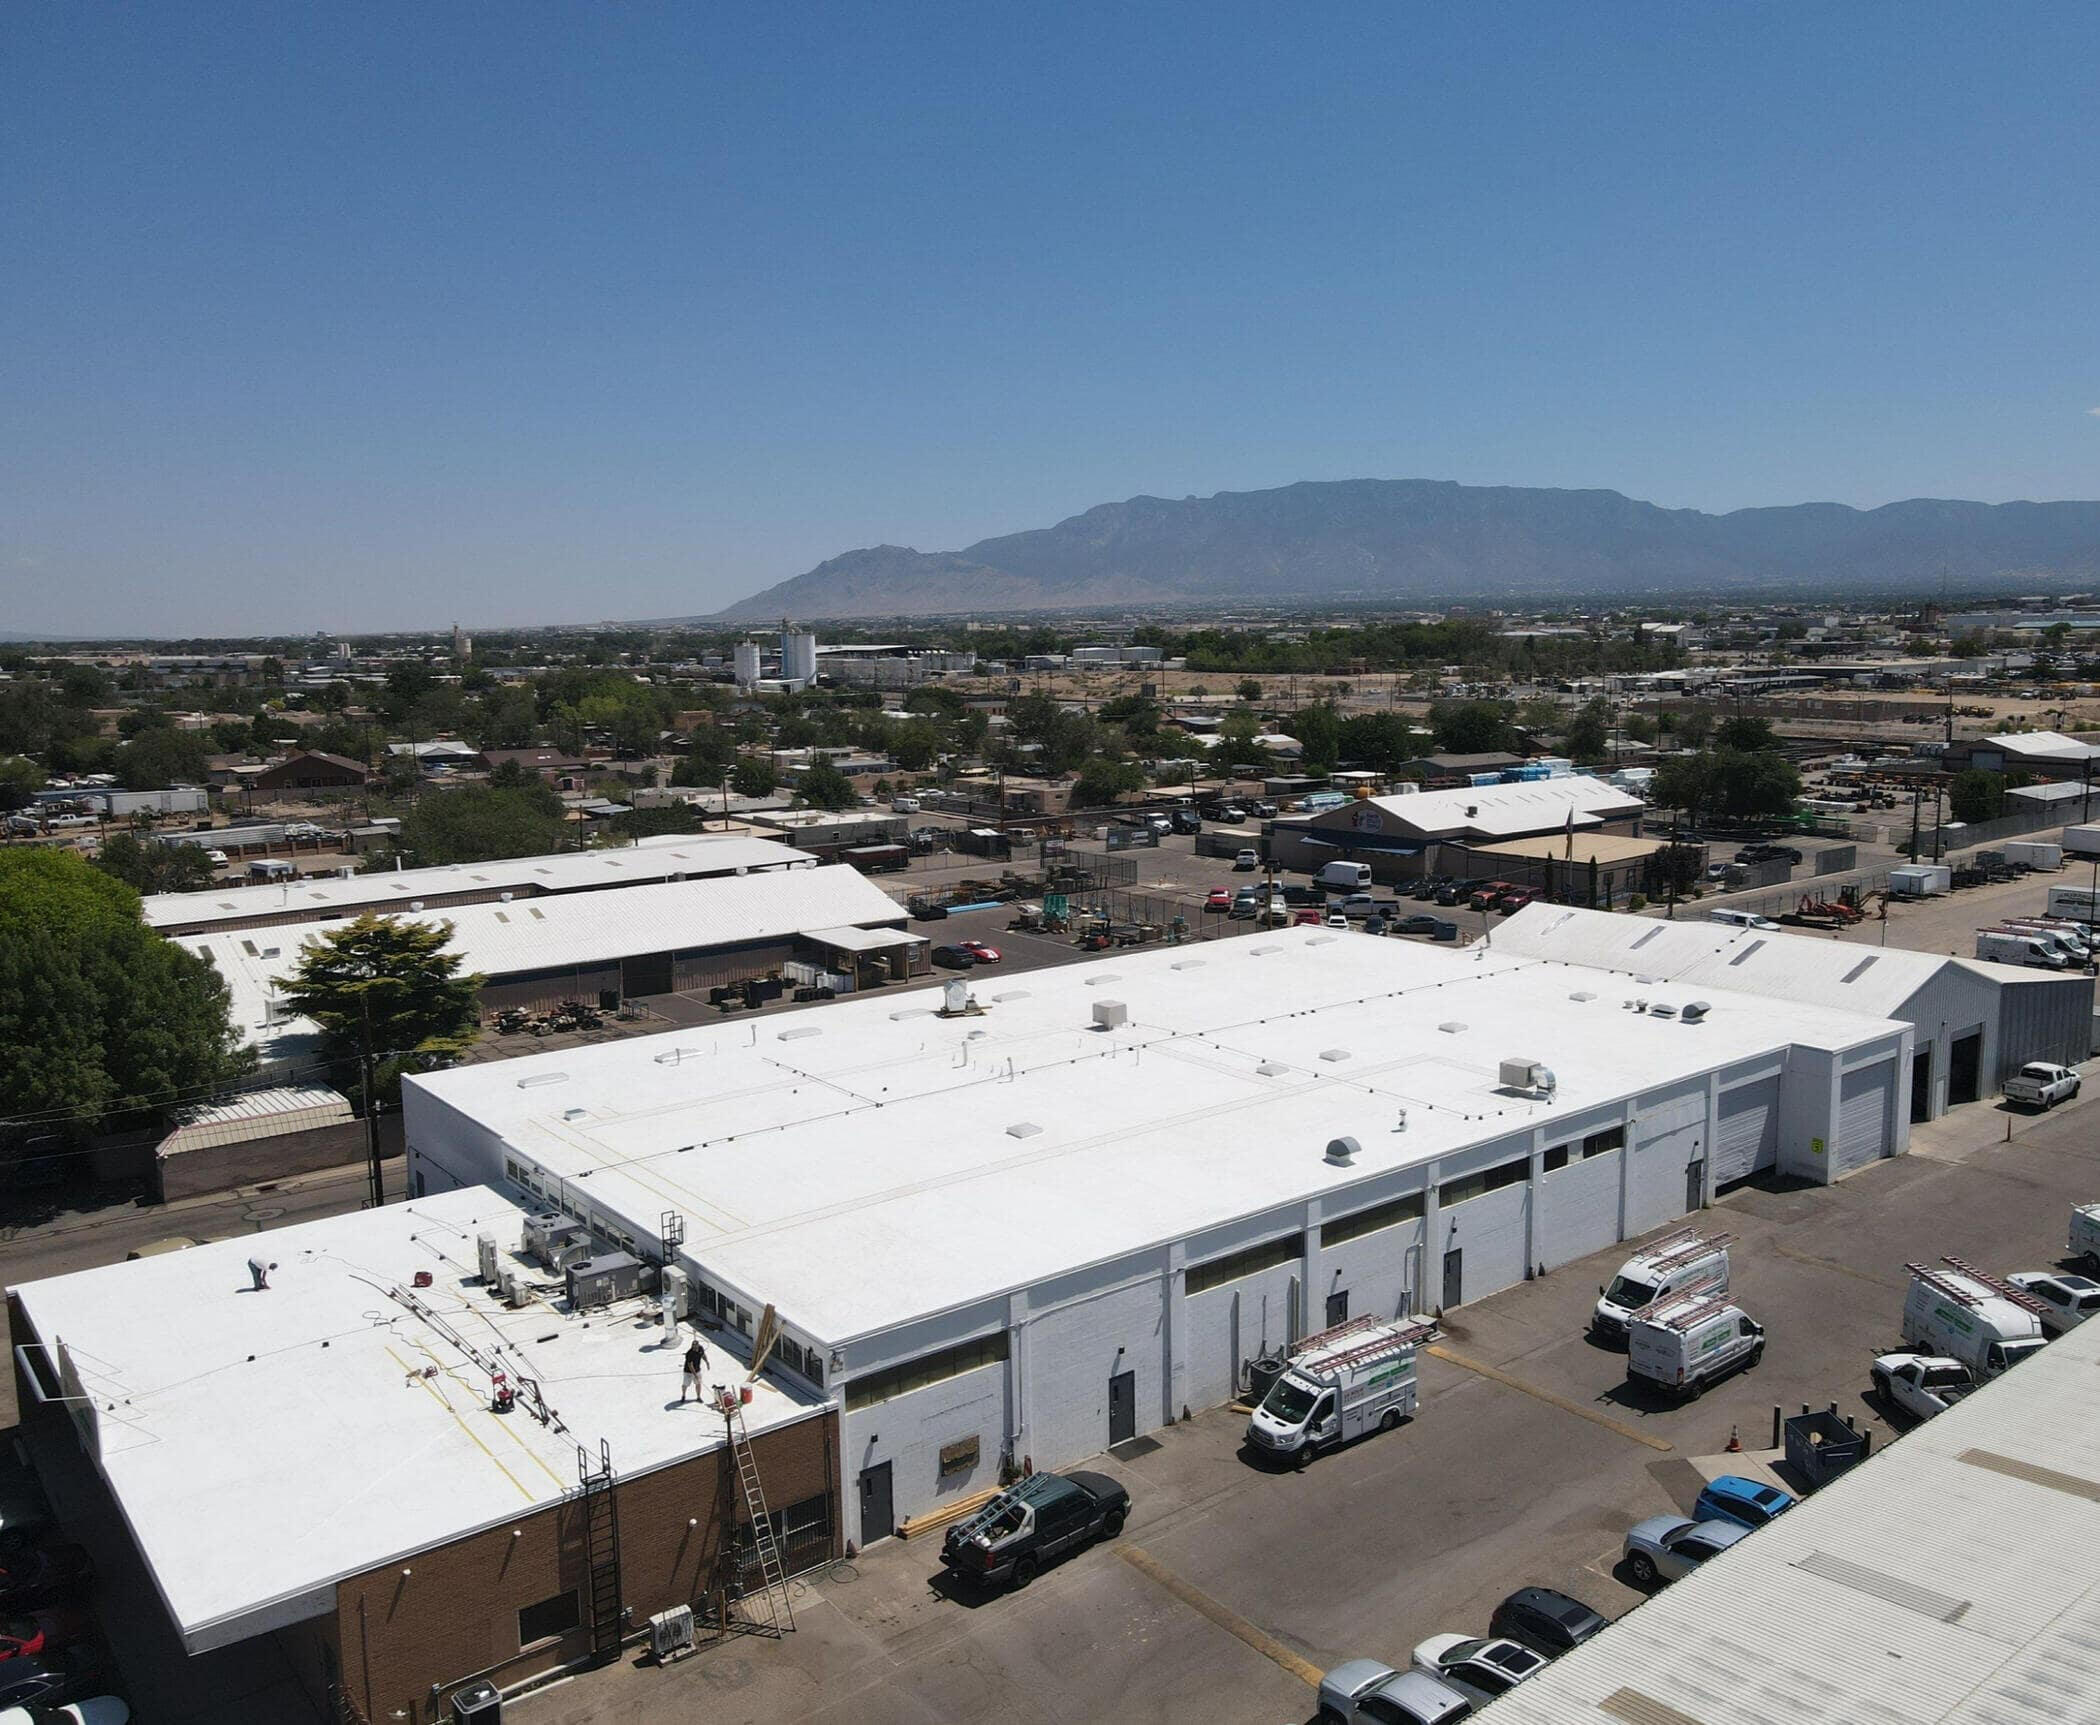 Aerial view captured by a drone of a large flat roof commercial building in Albuquerque, New Mexico. A ladder leans against the side of the building, and a roofer is seen working on the new white TPO roof.